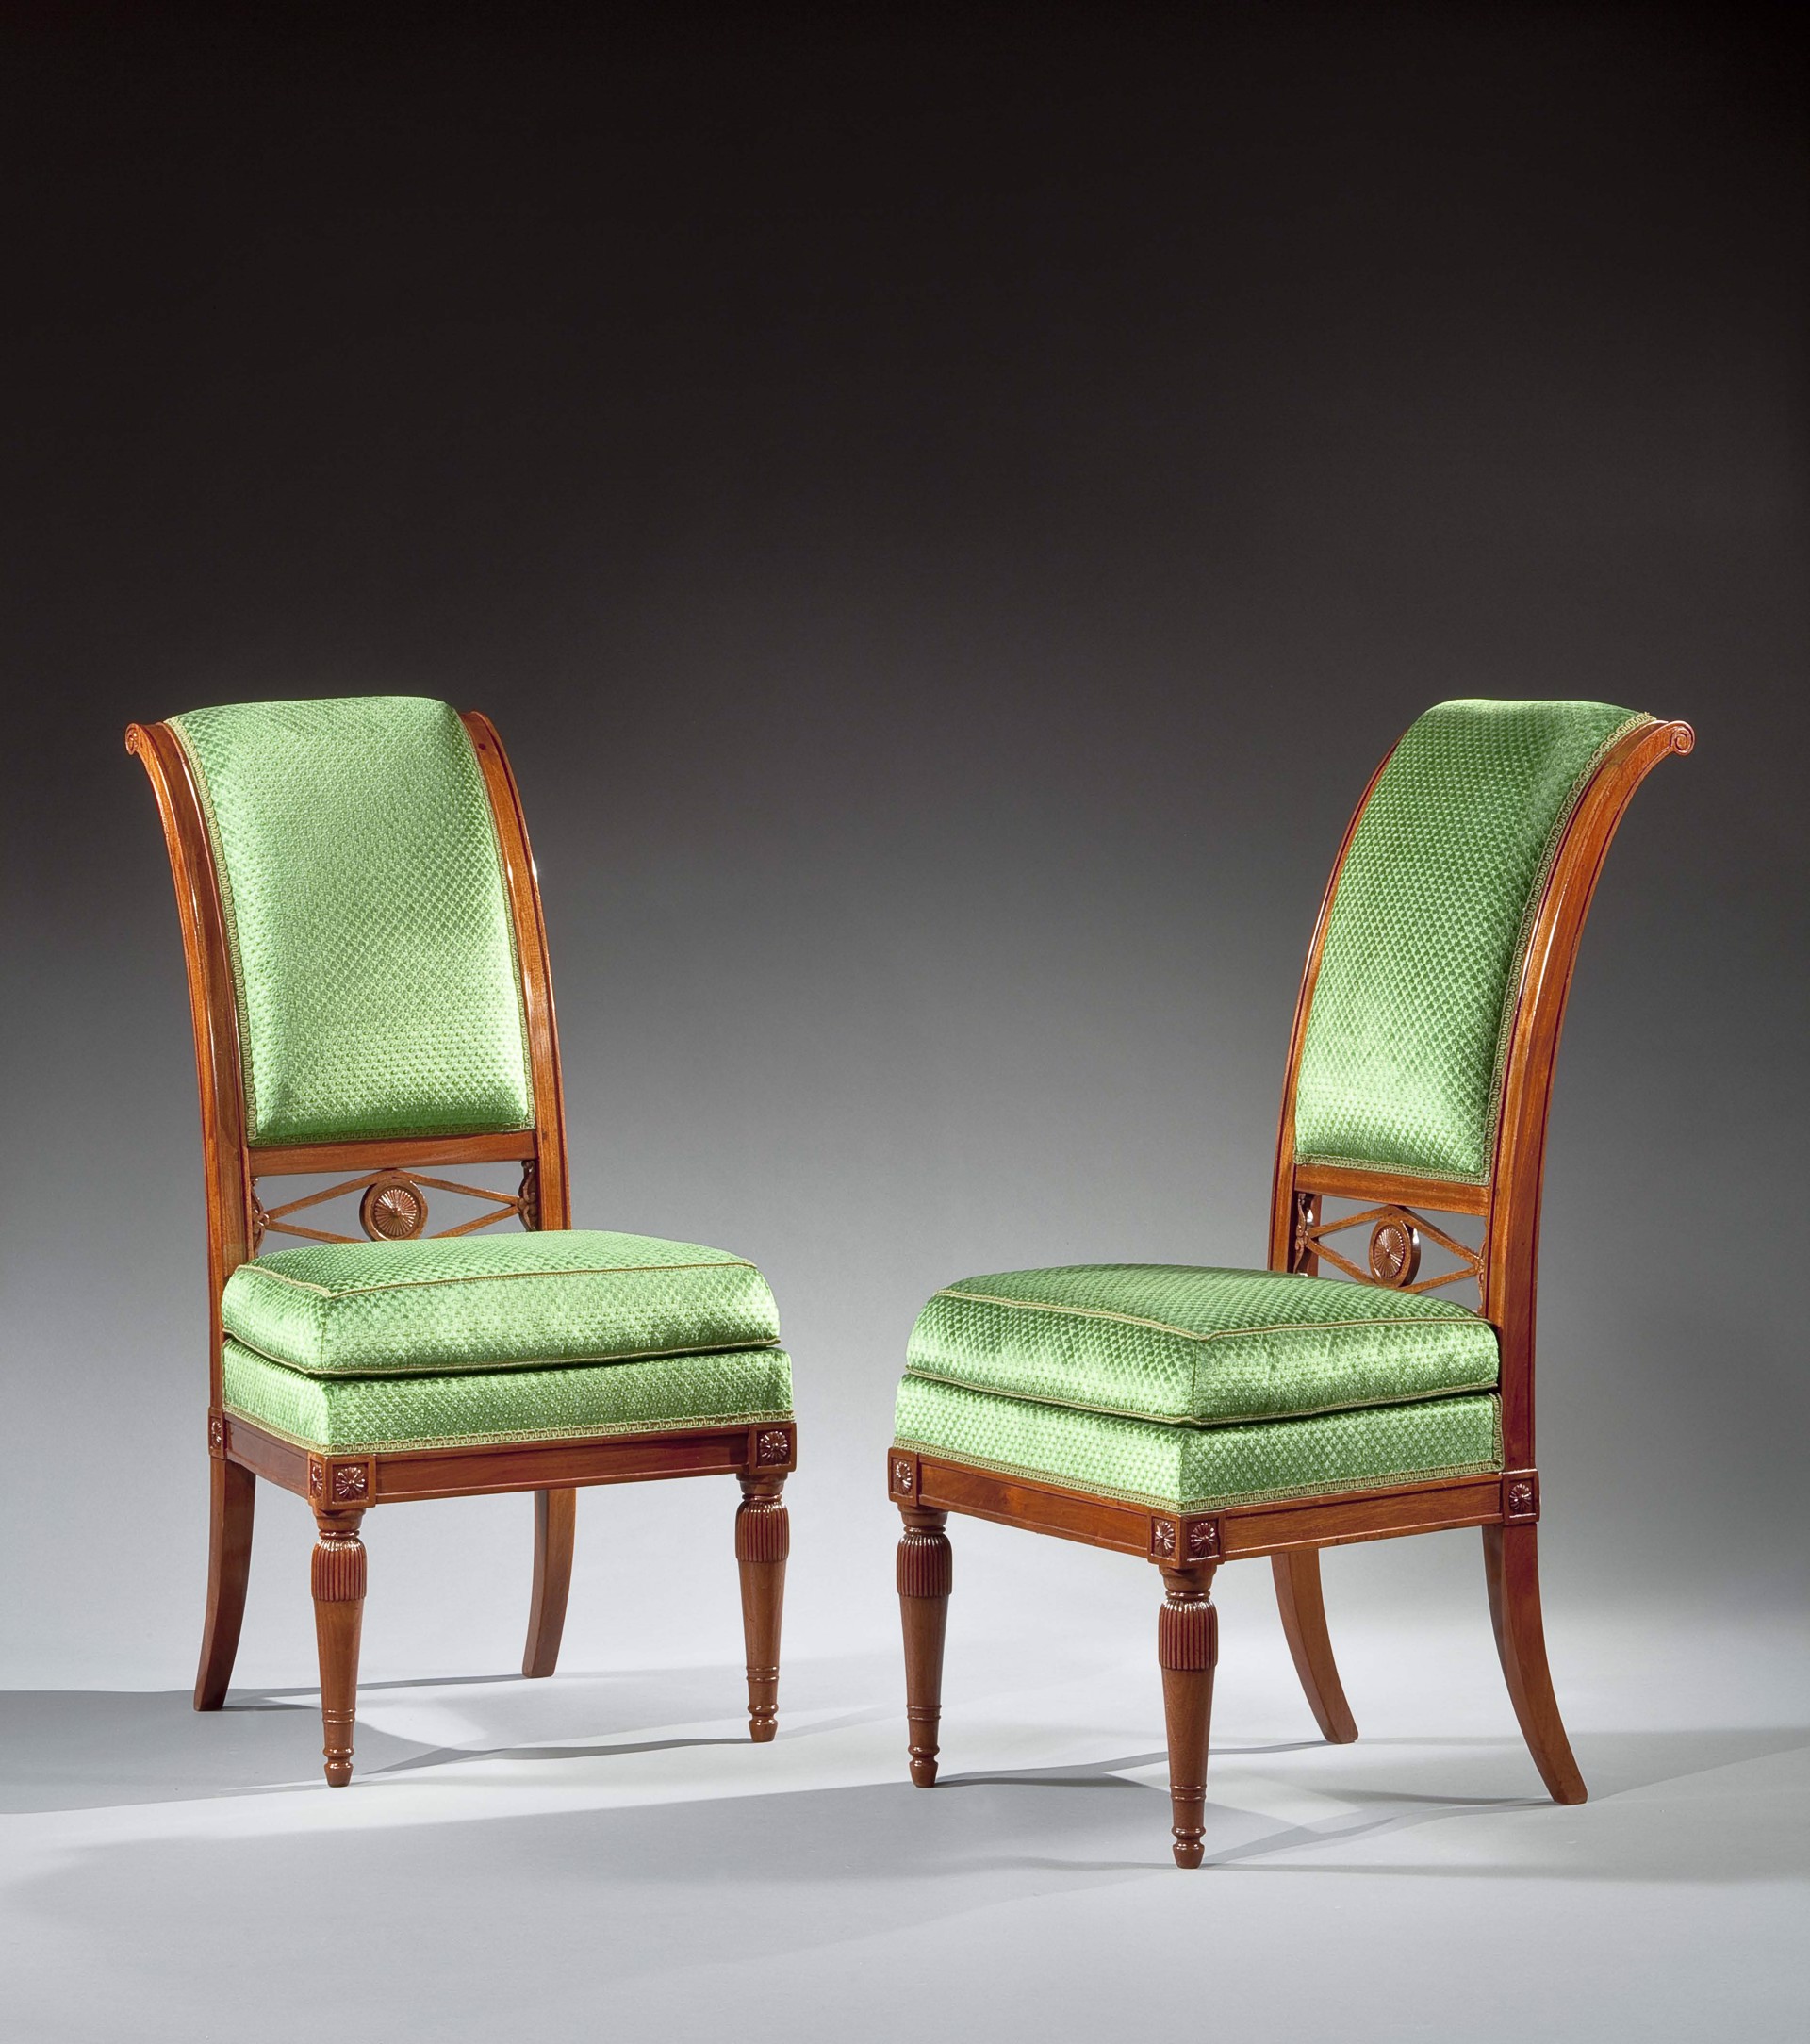 PAIR OF LOUIS XVI CHAIRS WITH CURVED AND FLUTED BACKS